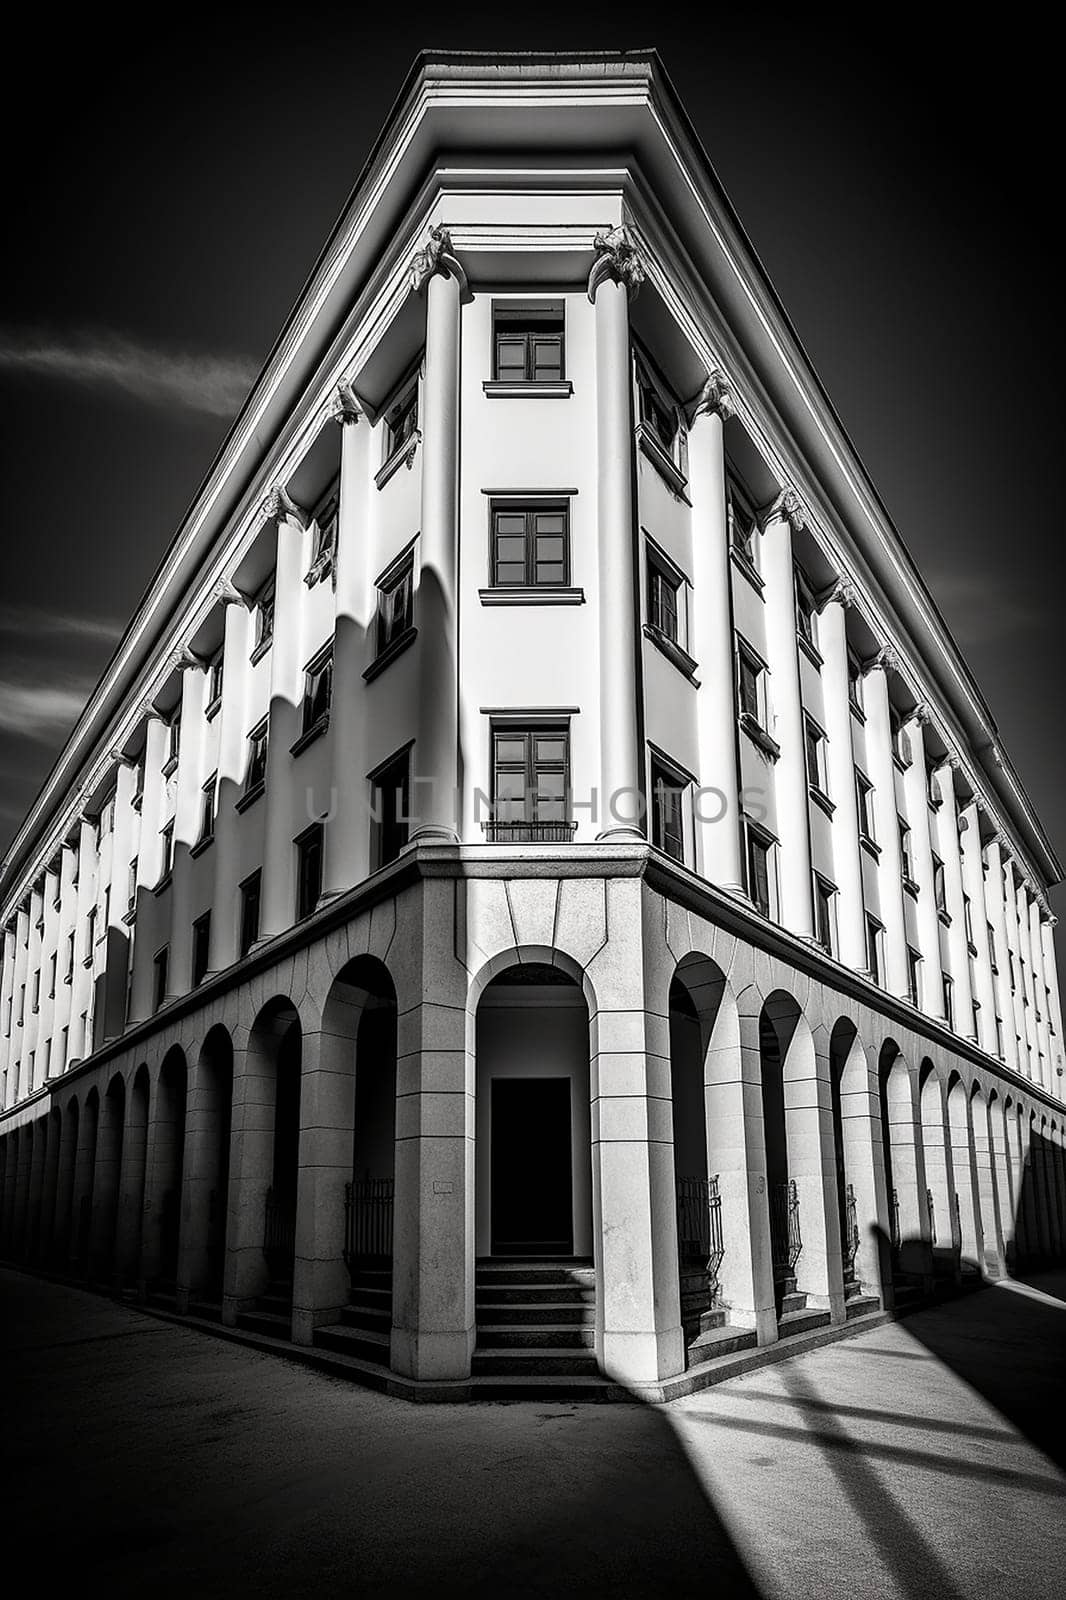 Black and white photo of a symmetrical building with arches and columns